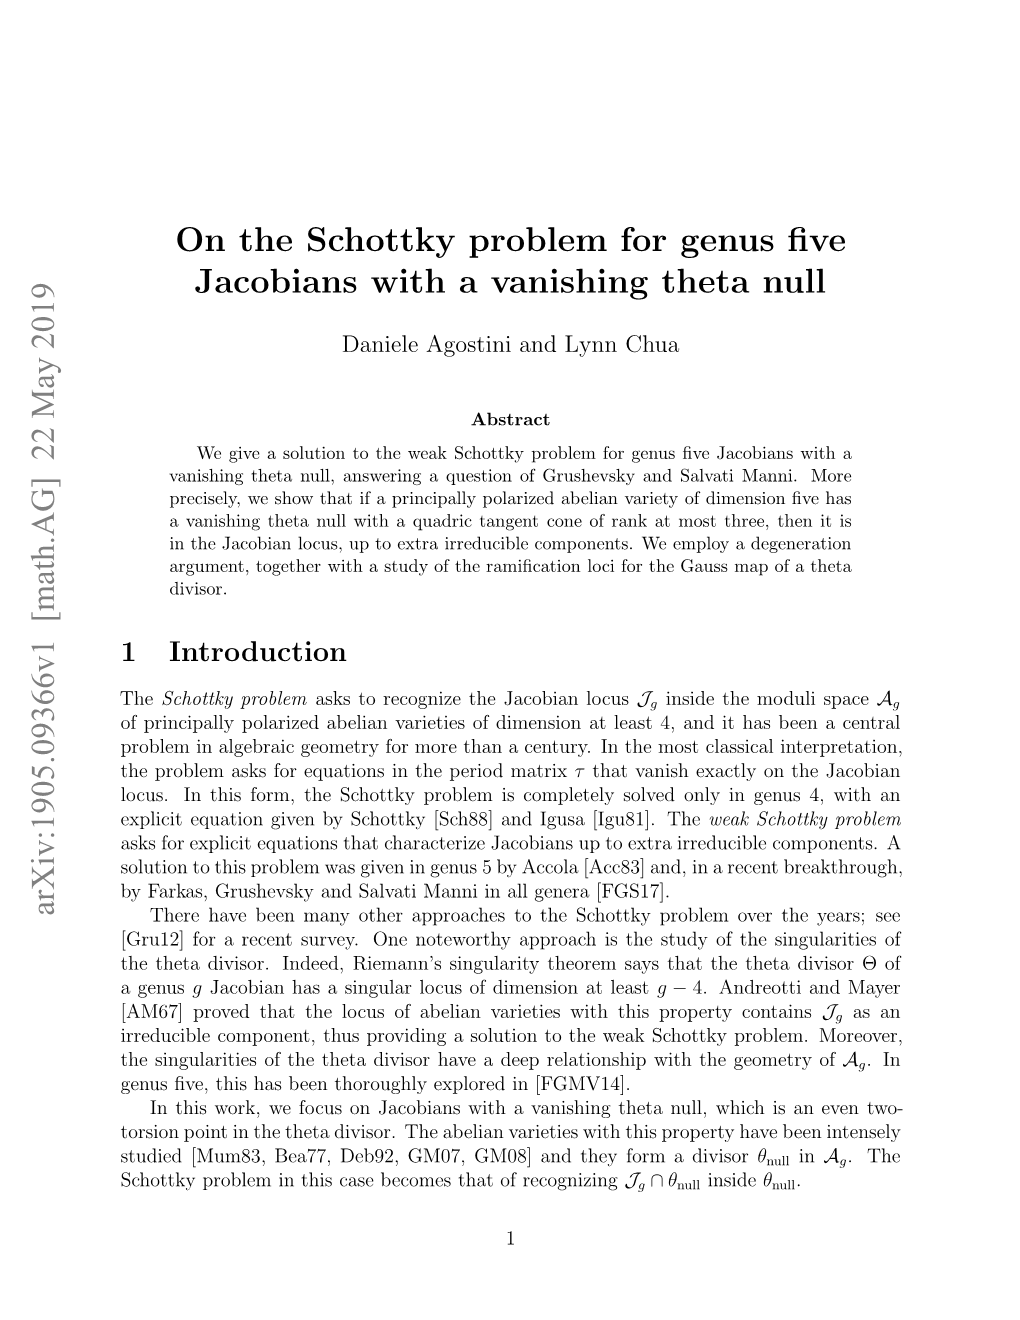 On the Schottky Problem for Genus Five Jacobians with a Vanishing Theta Null